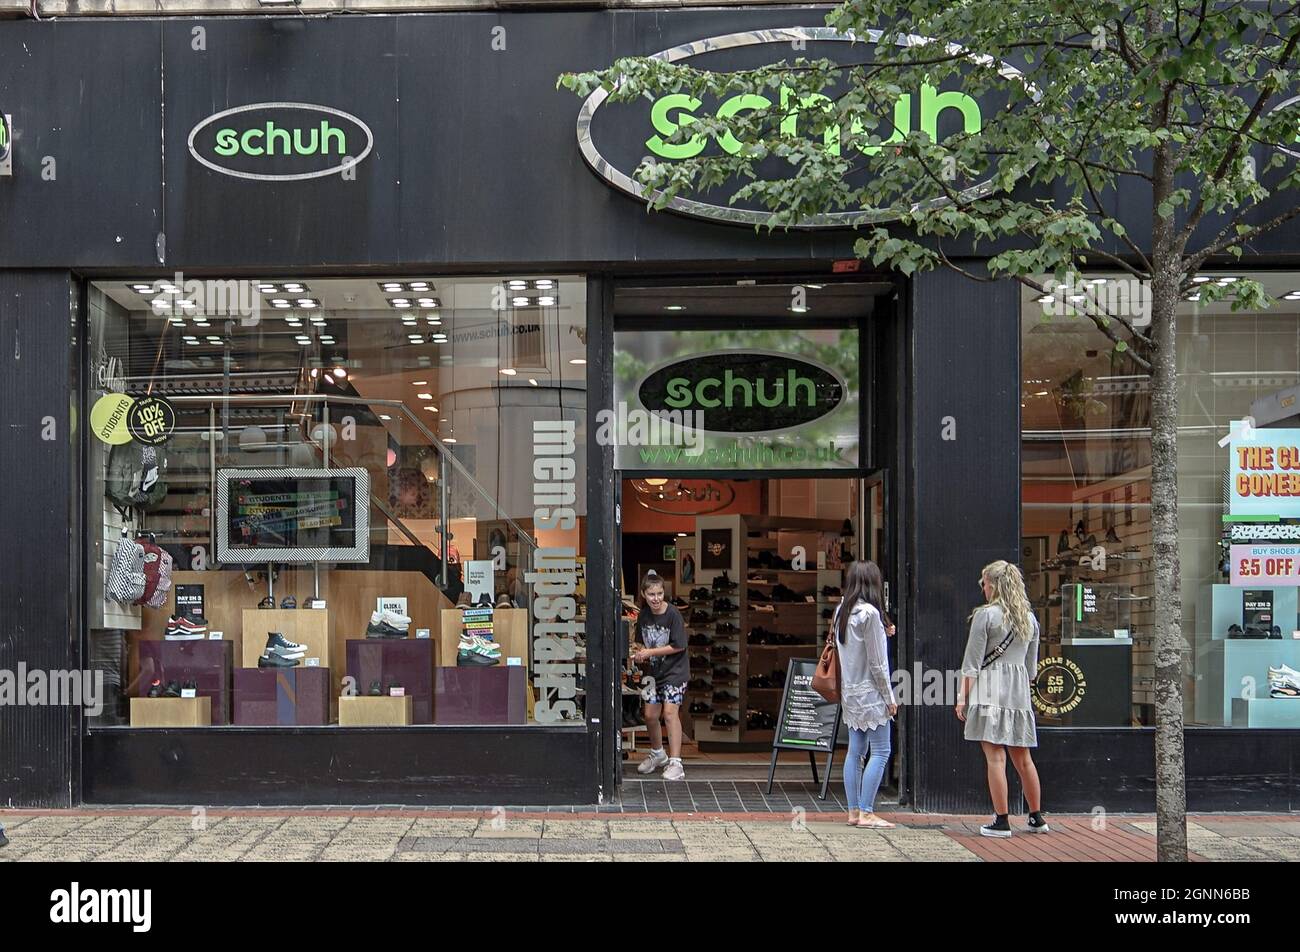 Schuh Logo High Resolution Stock Photography and Images - Alamy